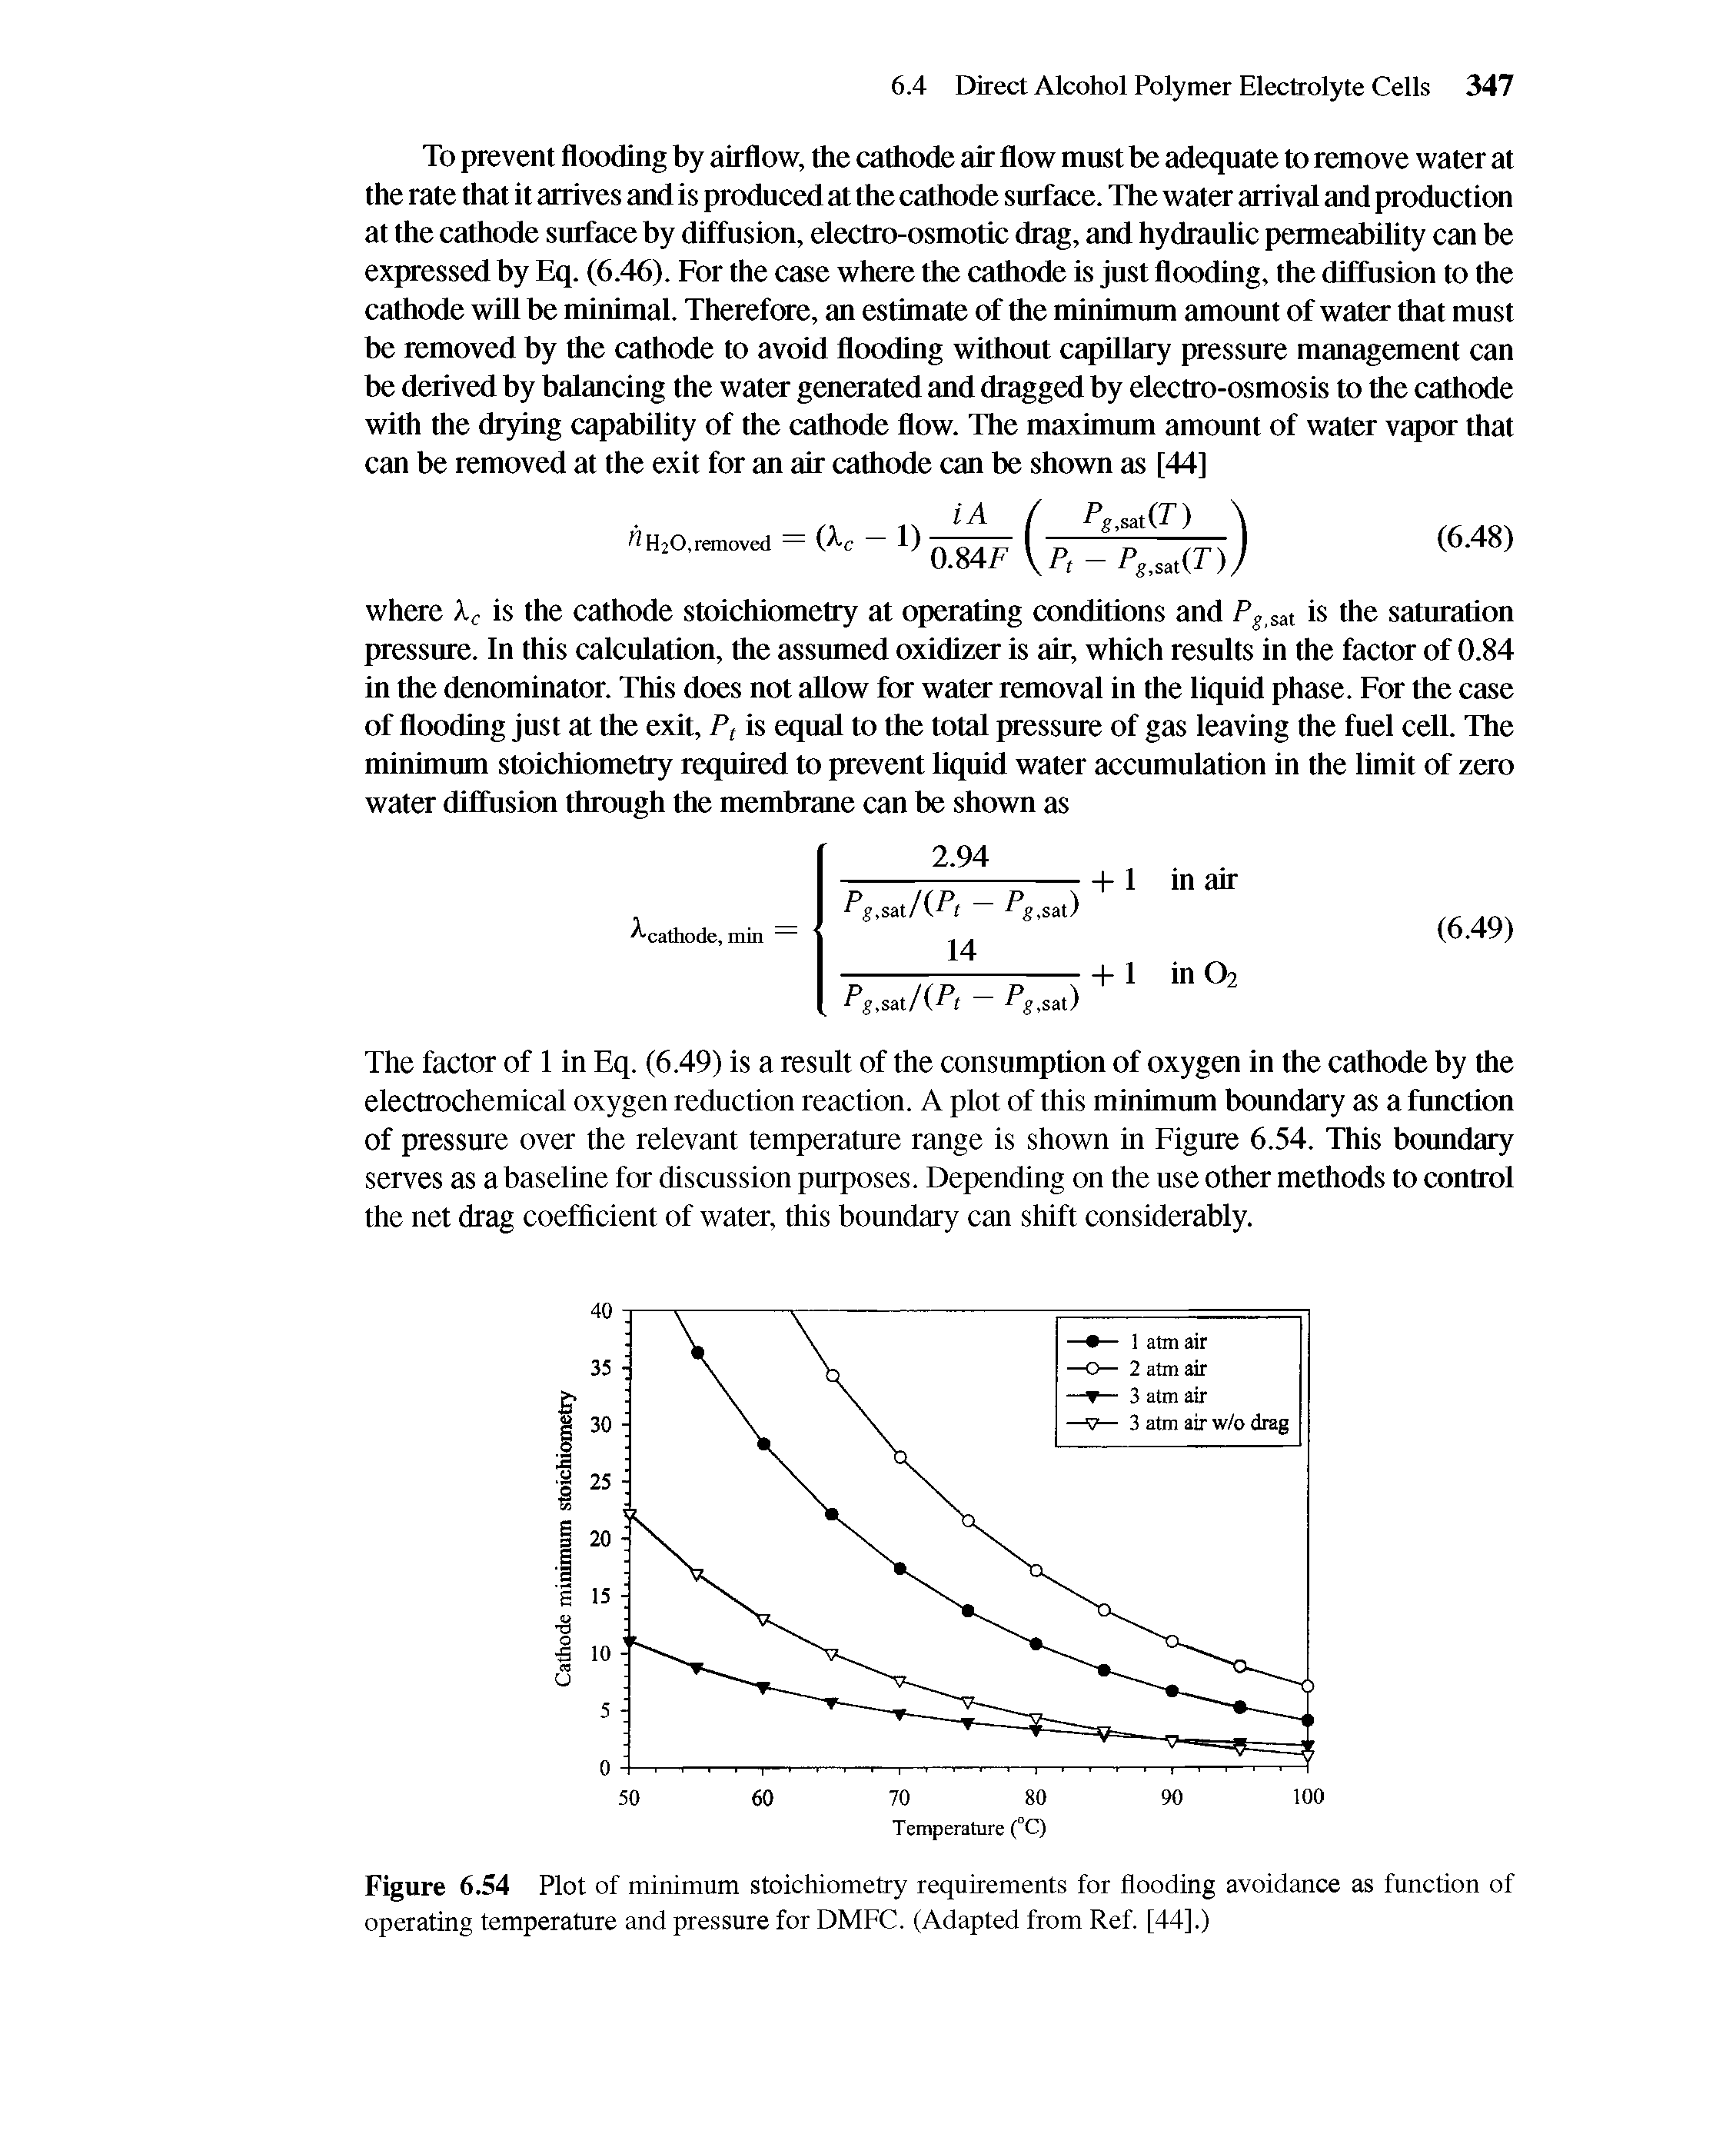 Figure 6.54 Plot of minimum stoichiometry requirements for flooding avoidance as function of operating temperature and pressure for DMFC. (Adapted from Ref. [44].)...